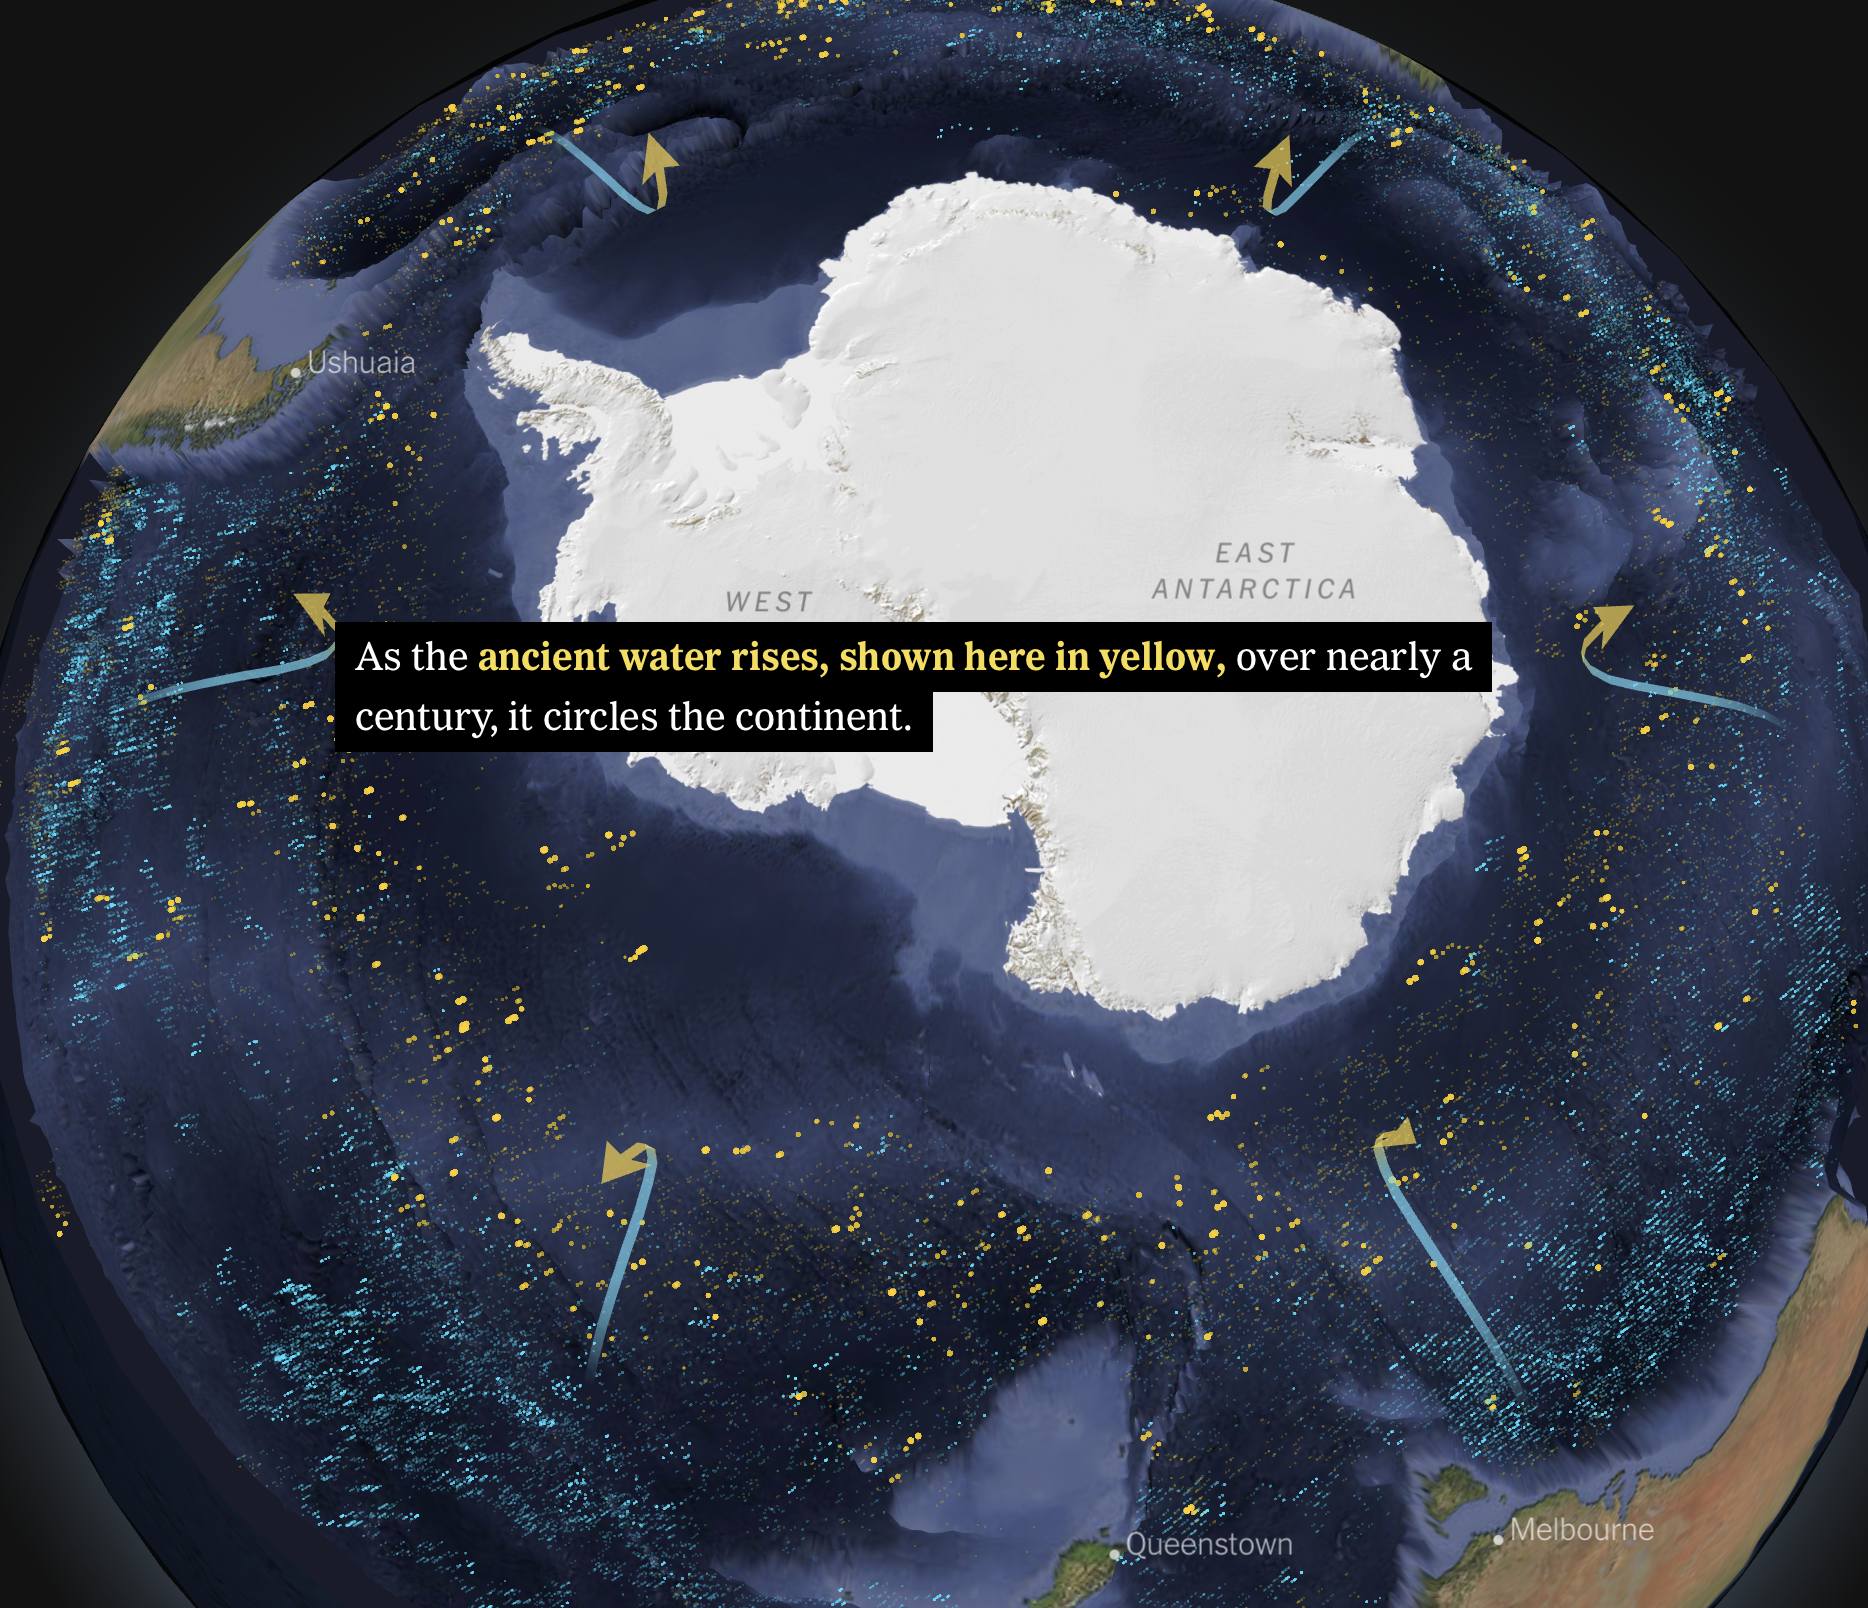 Shifting currents and melting ice in the Antarctic